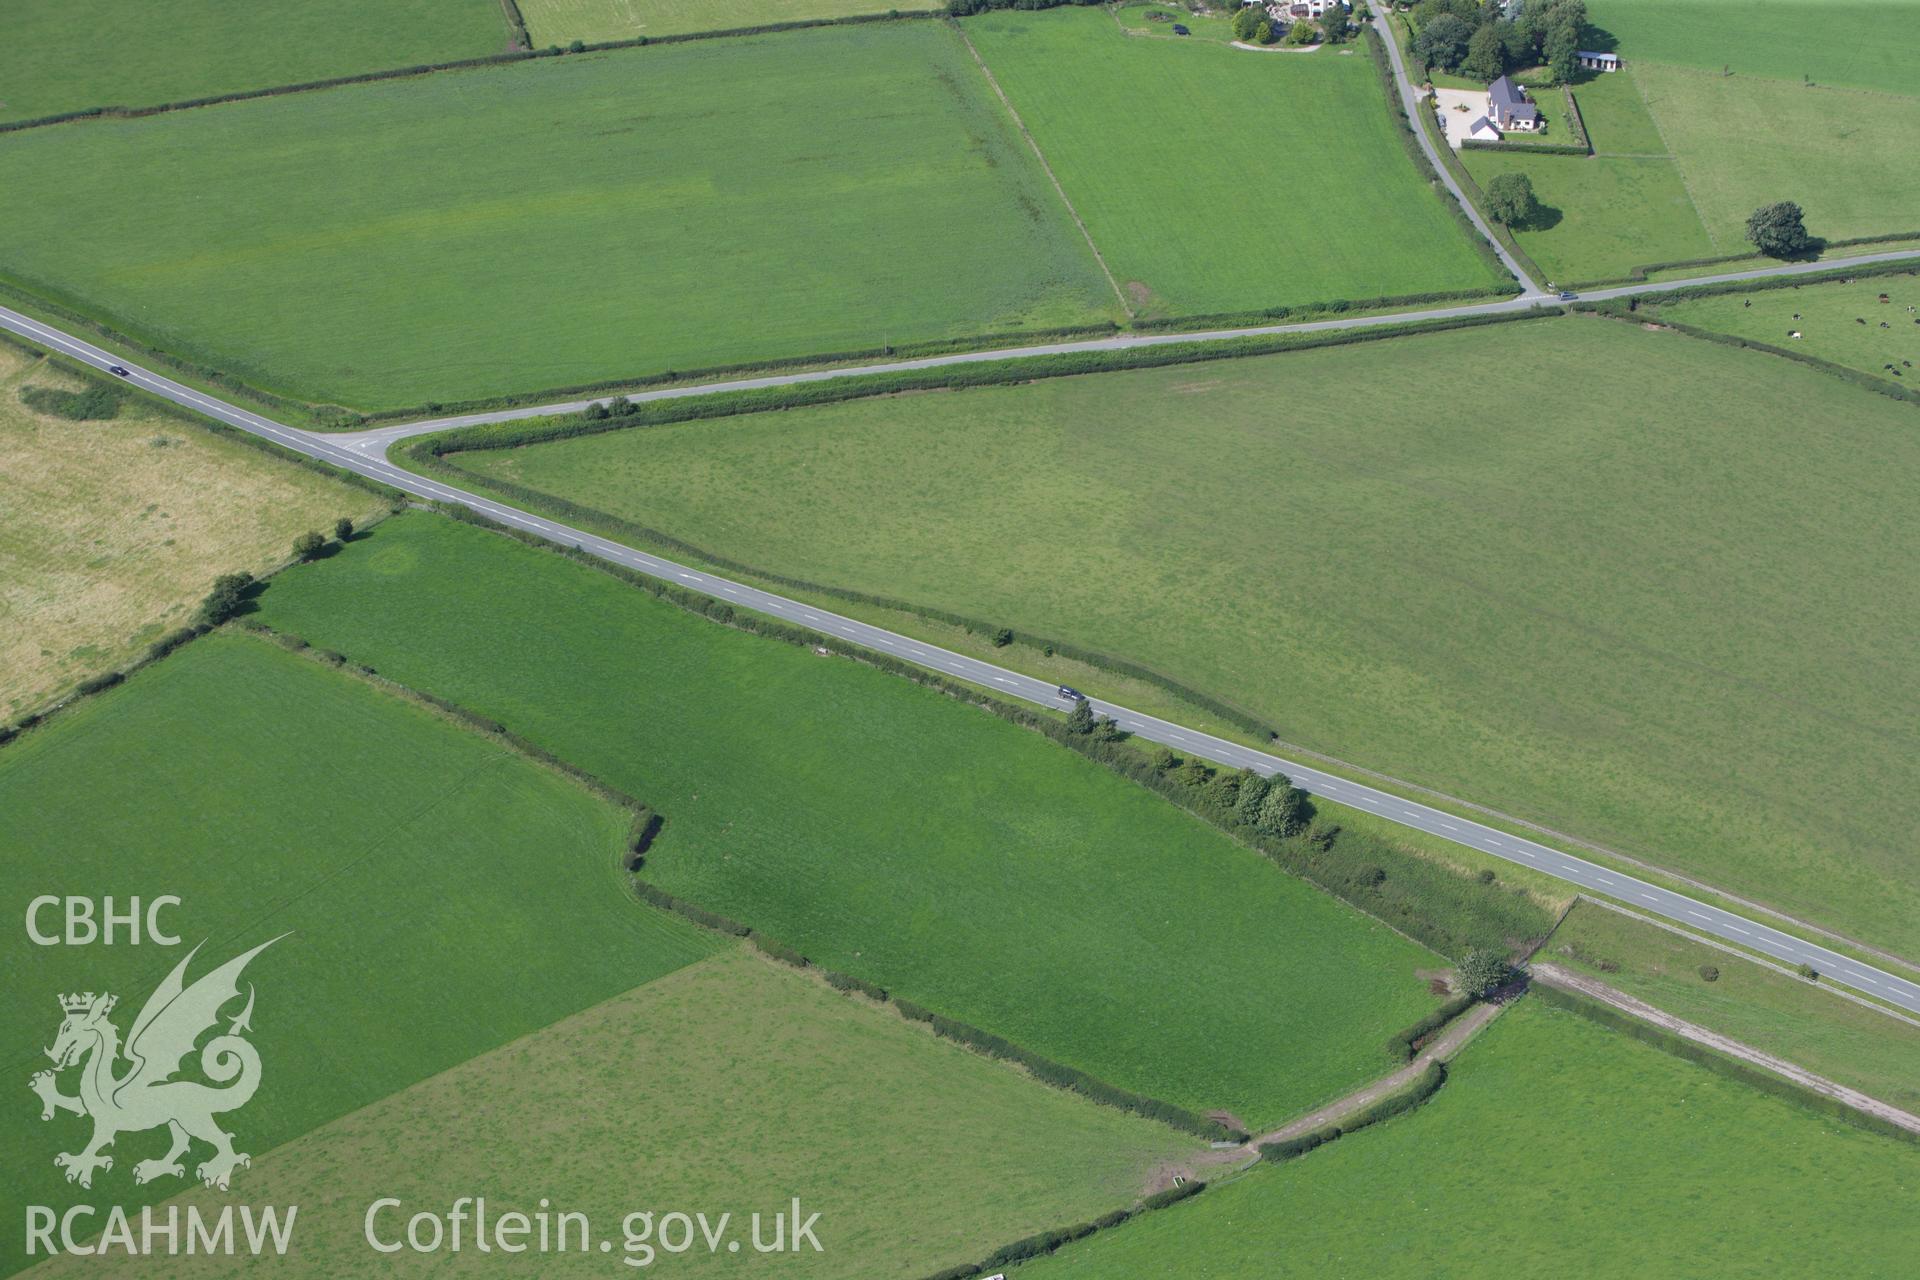 RCAHMW colour oblique aerial photograph of a section of Offa's Dyke or Whitford Dyke, northwest of Tre Abbot-Fawr. Taken on 30 July 2009 by Toby Driver